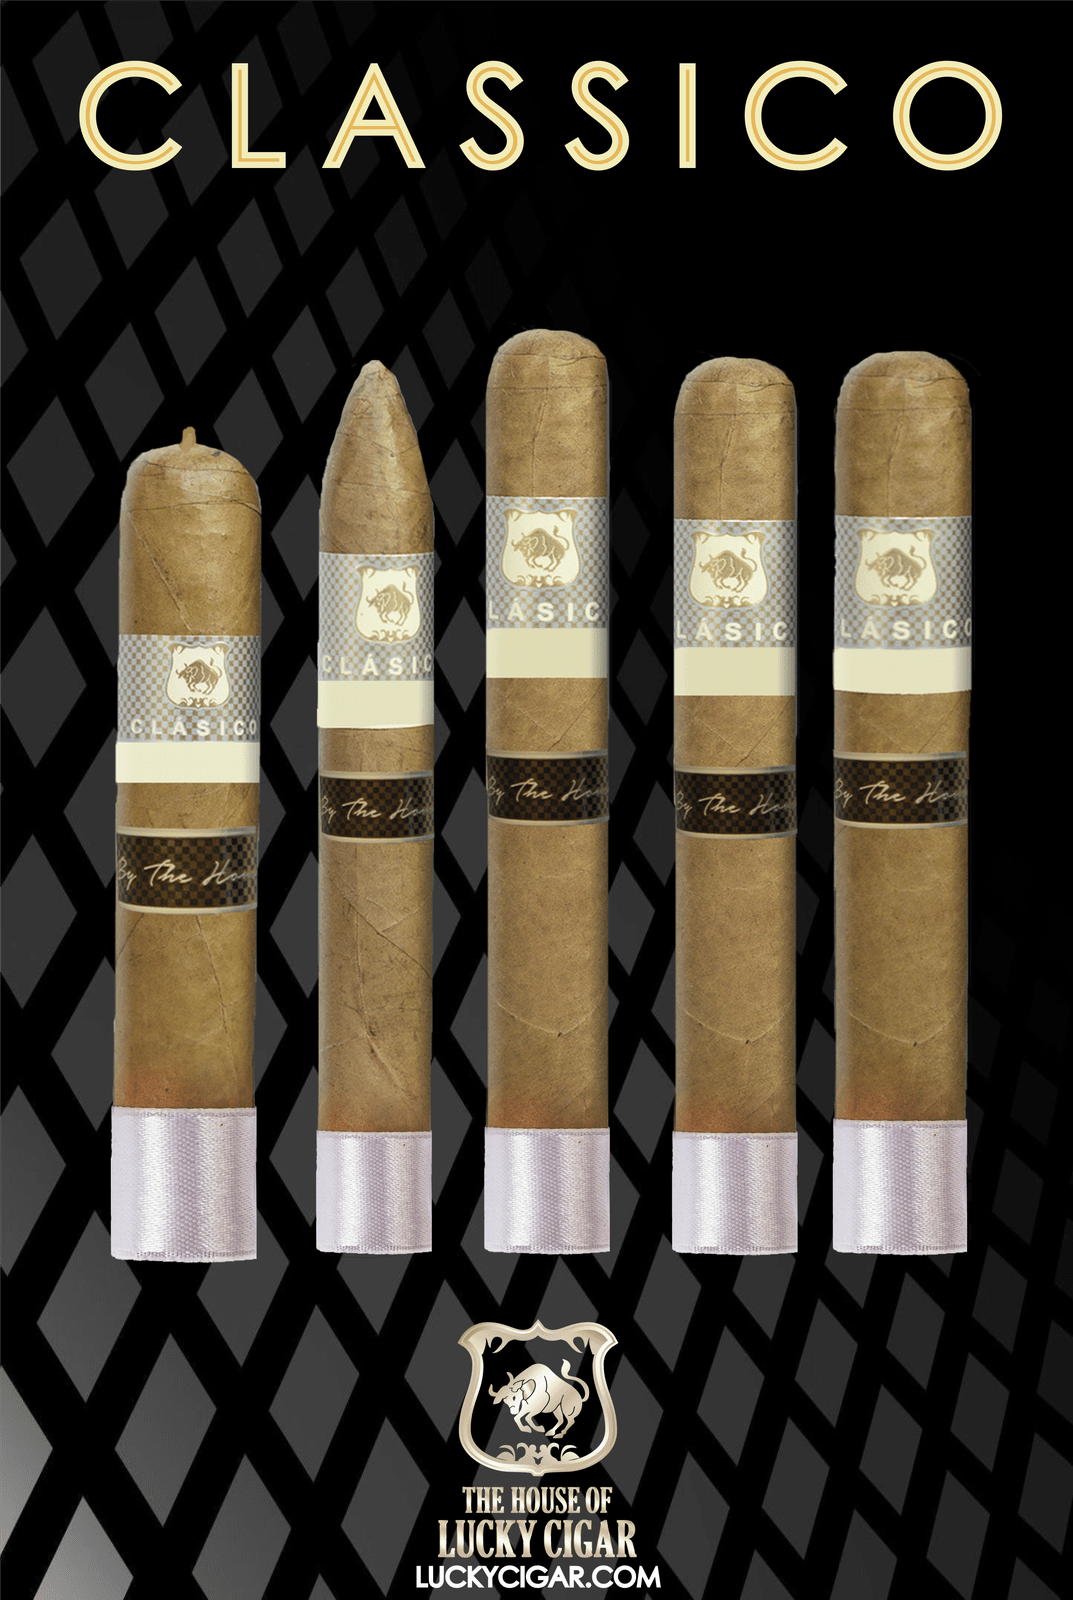 Cigar Sets: 5pc Clasico Collection of Cigars 5x50, 6x50, 6x52, 6x60, 6x64